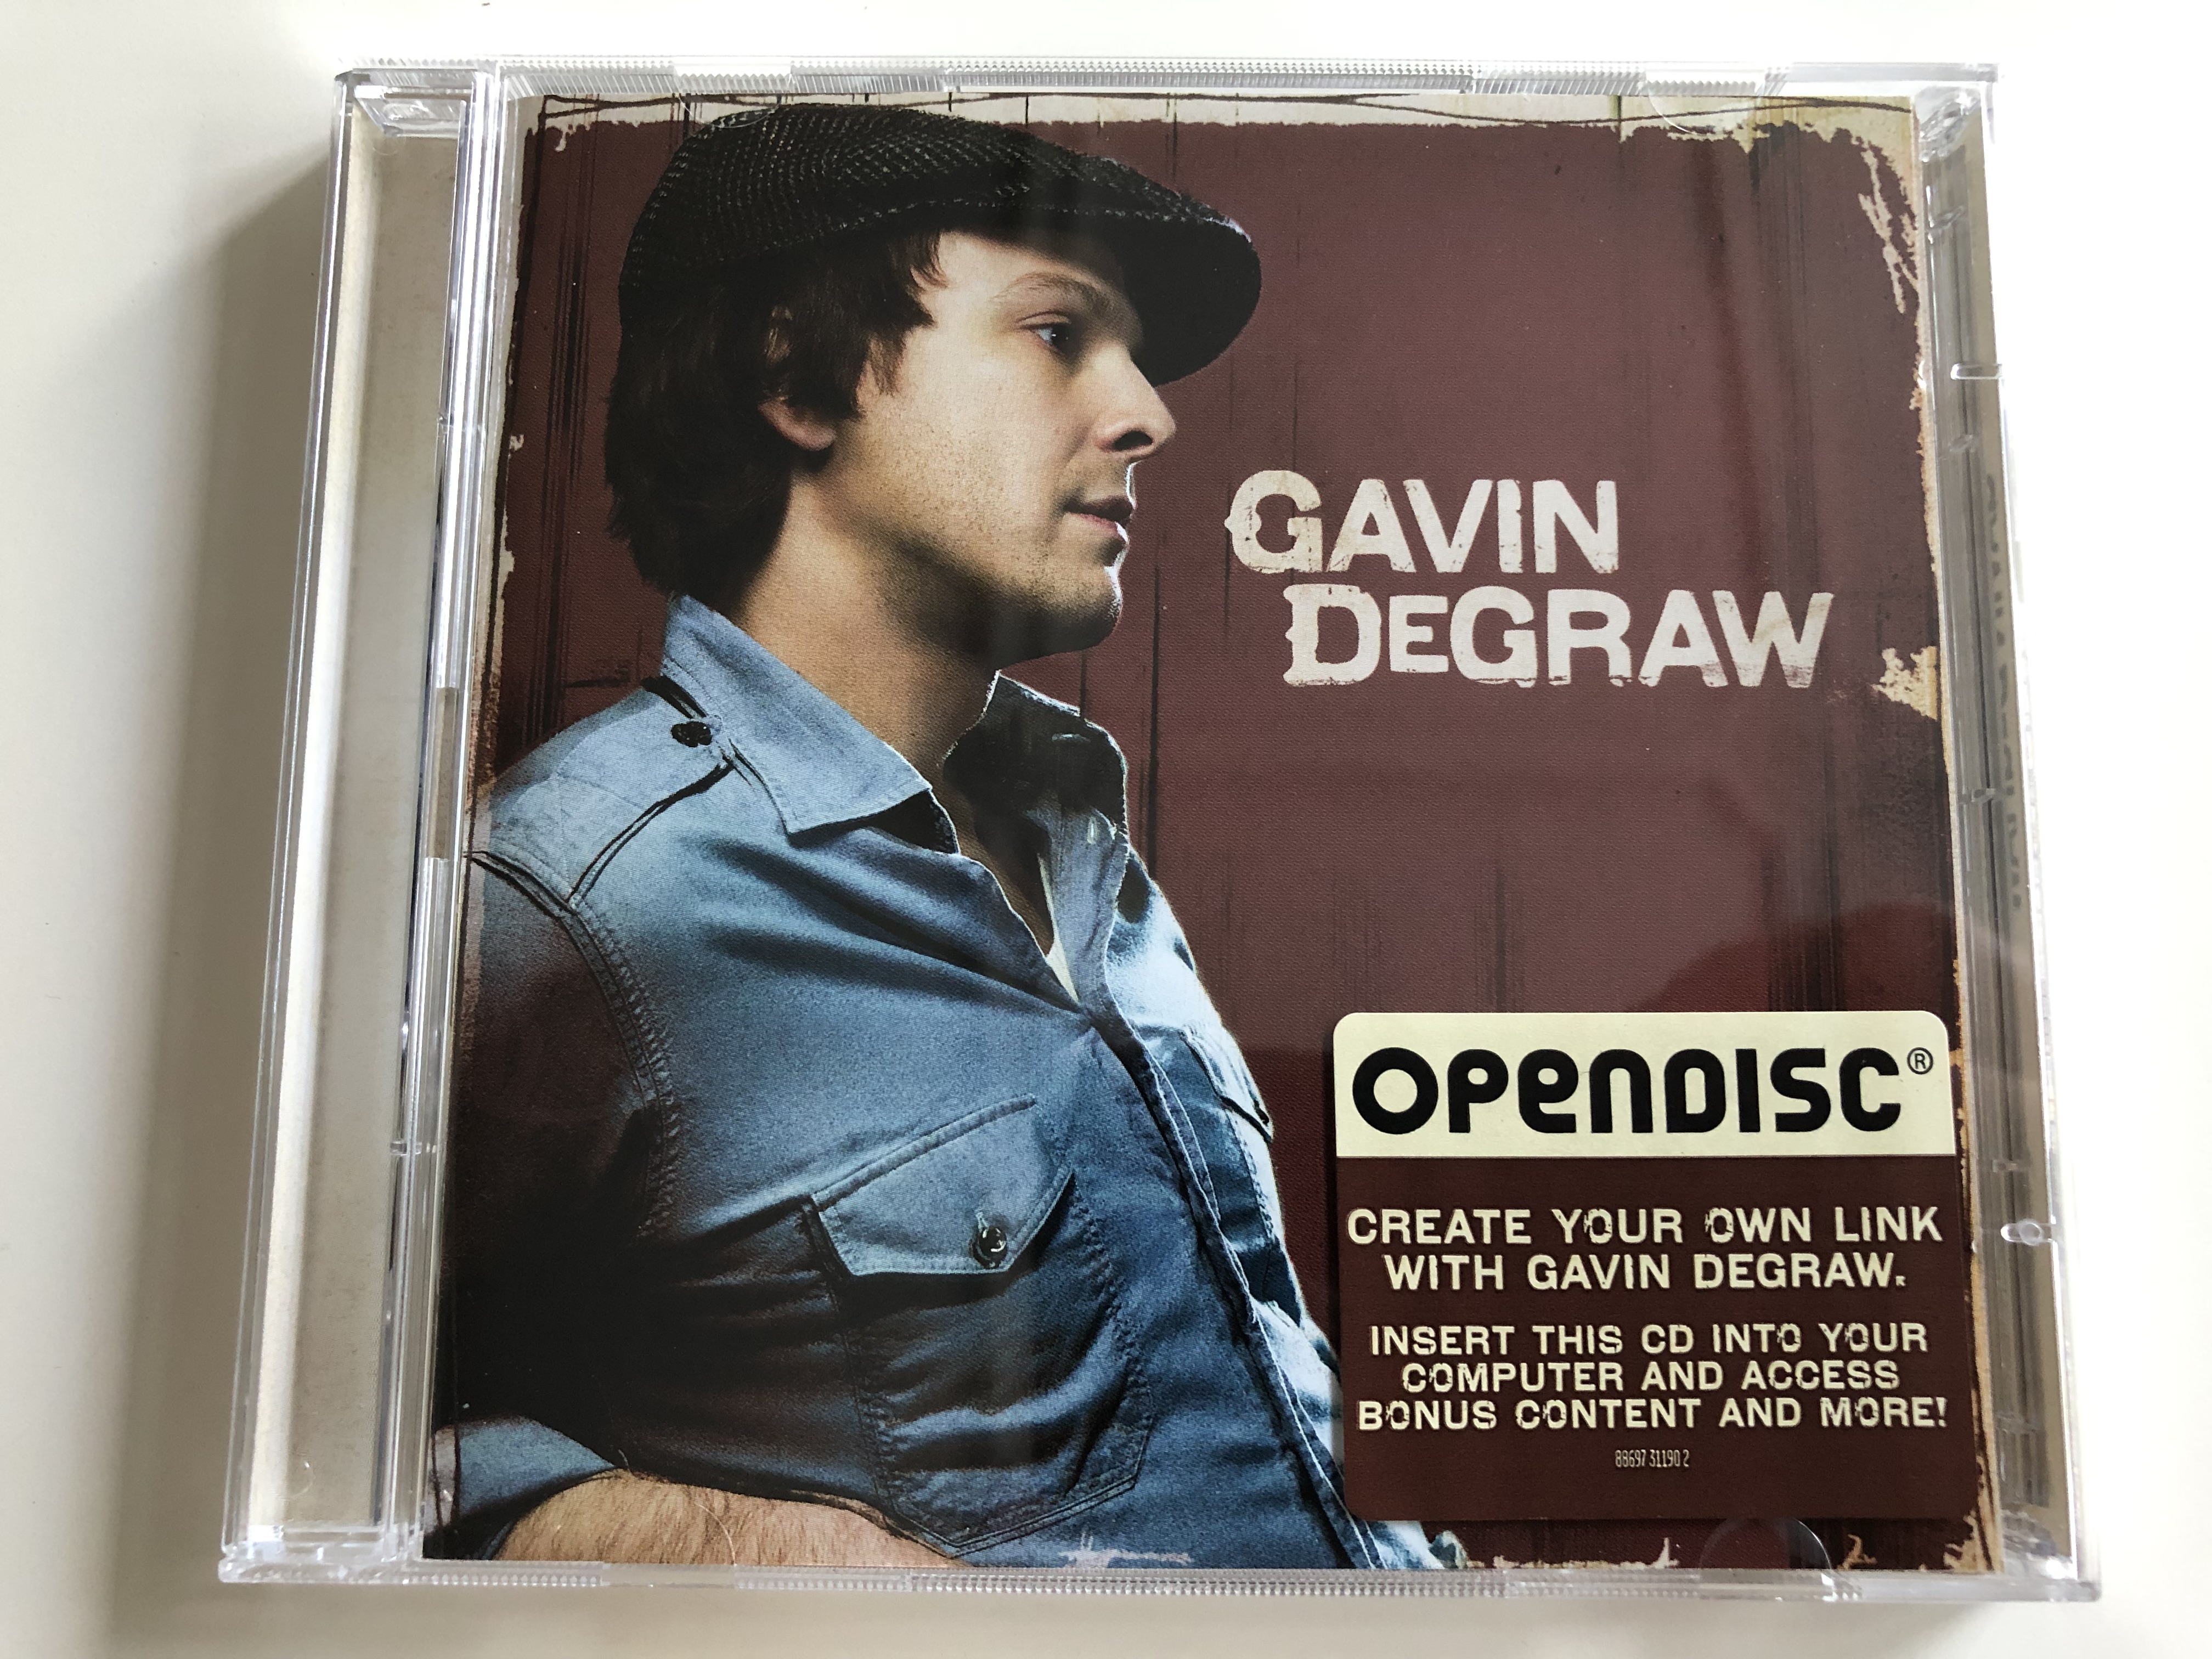 gavin-degraw-opendisc-in-love-with-a-girl-next-to-me-she-holds-a-key-let-it-go-create-your-own-link-with-gavin-degraw-dvd-2008-1-.jpg